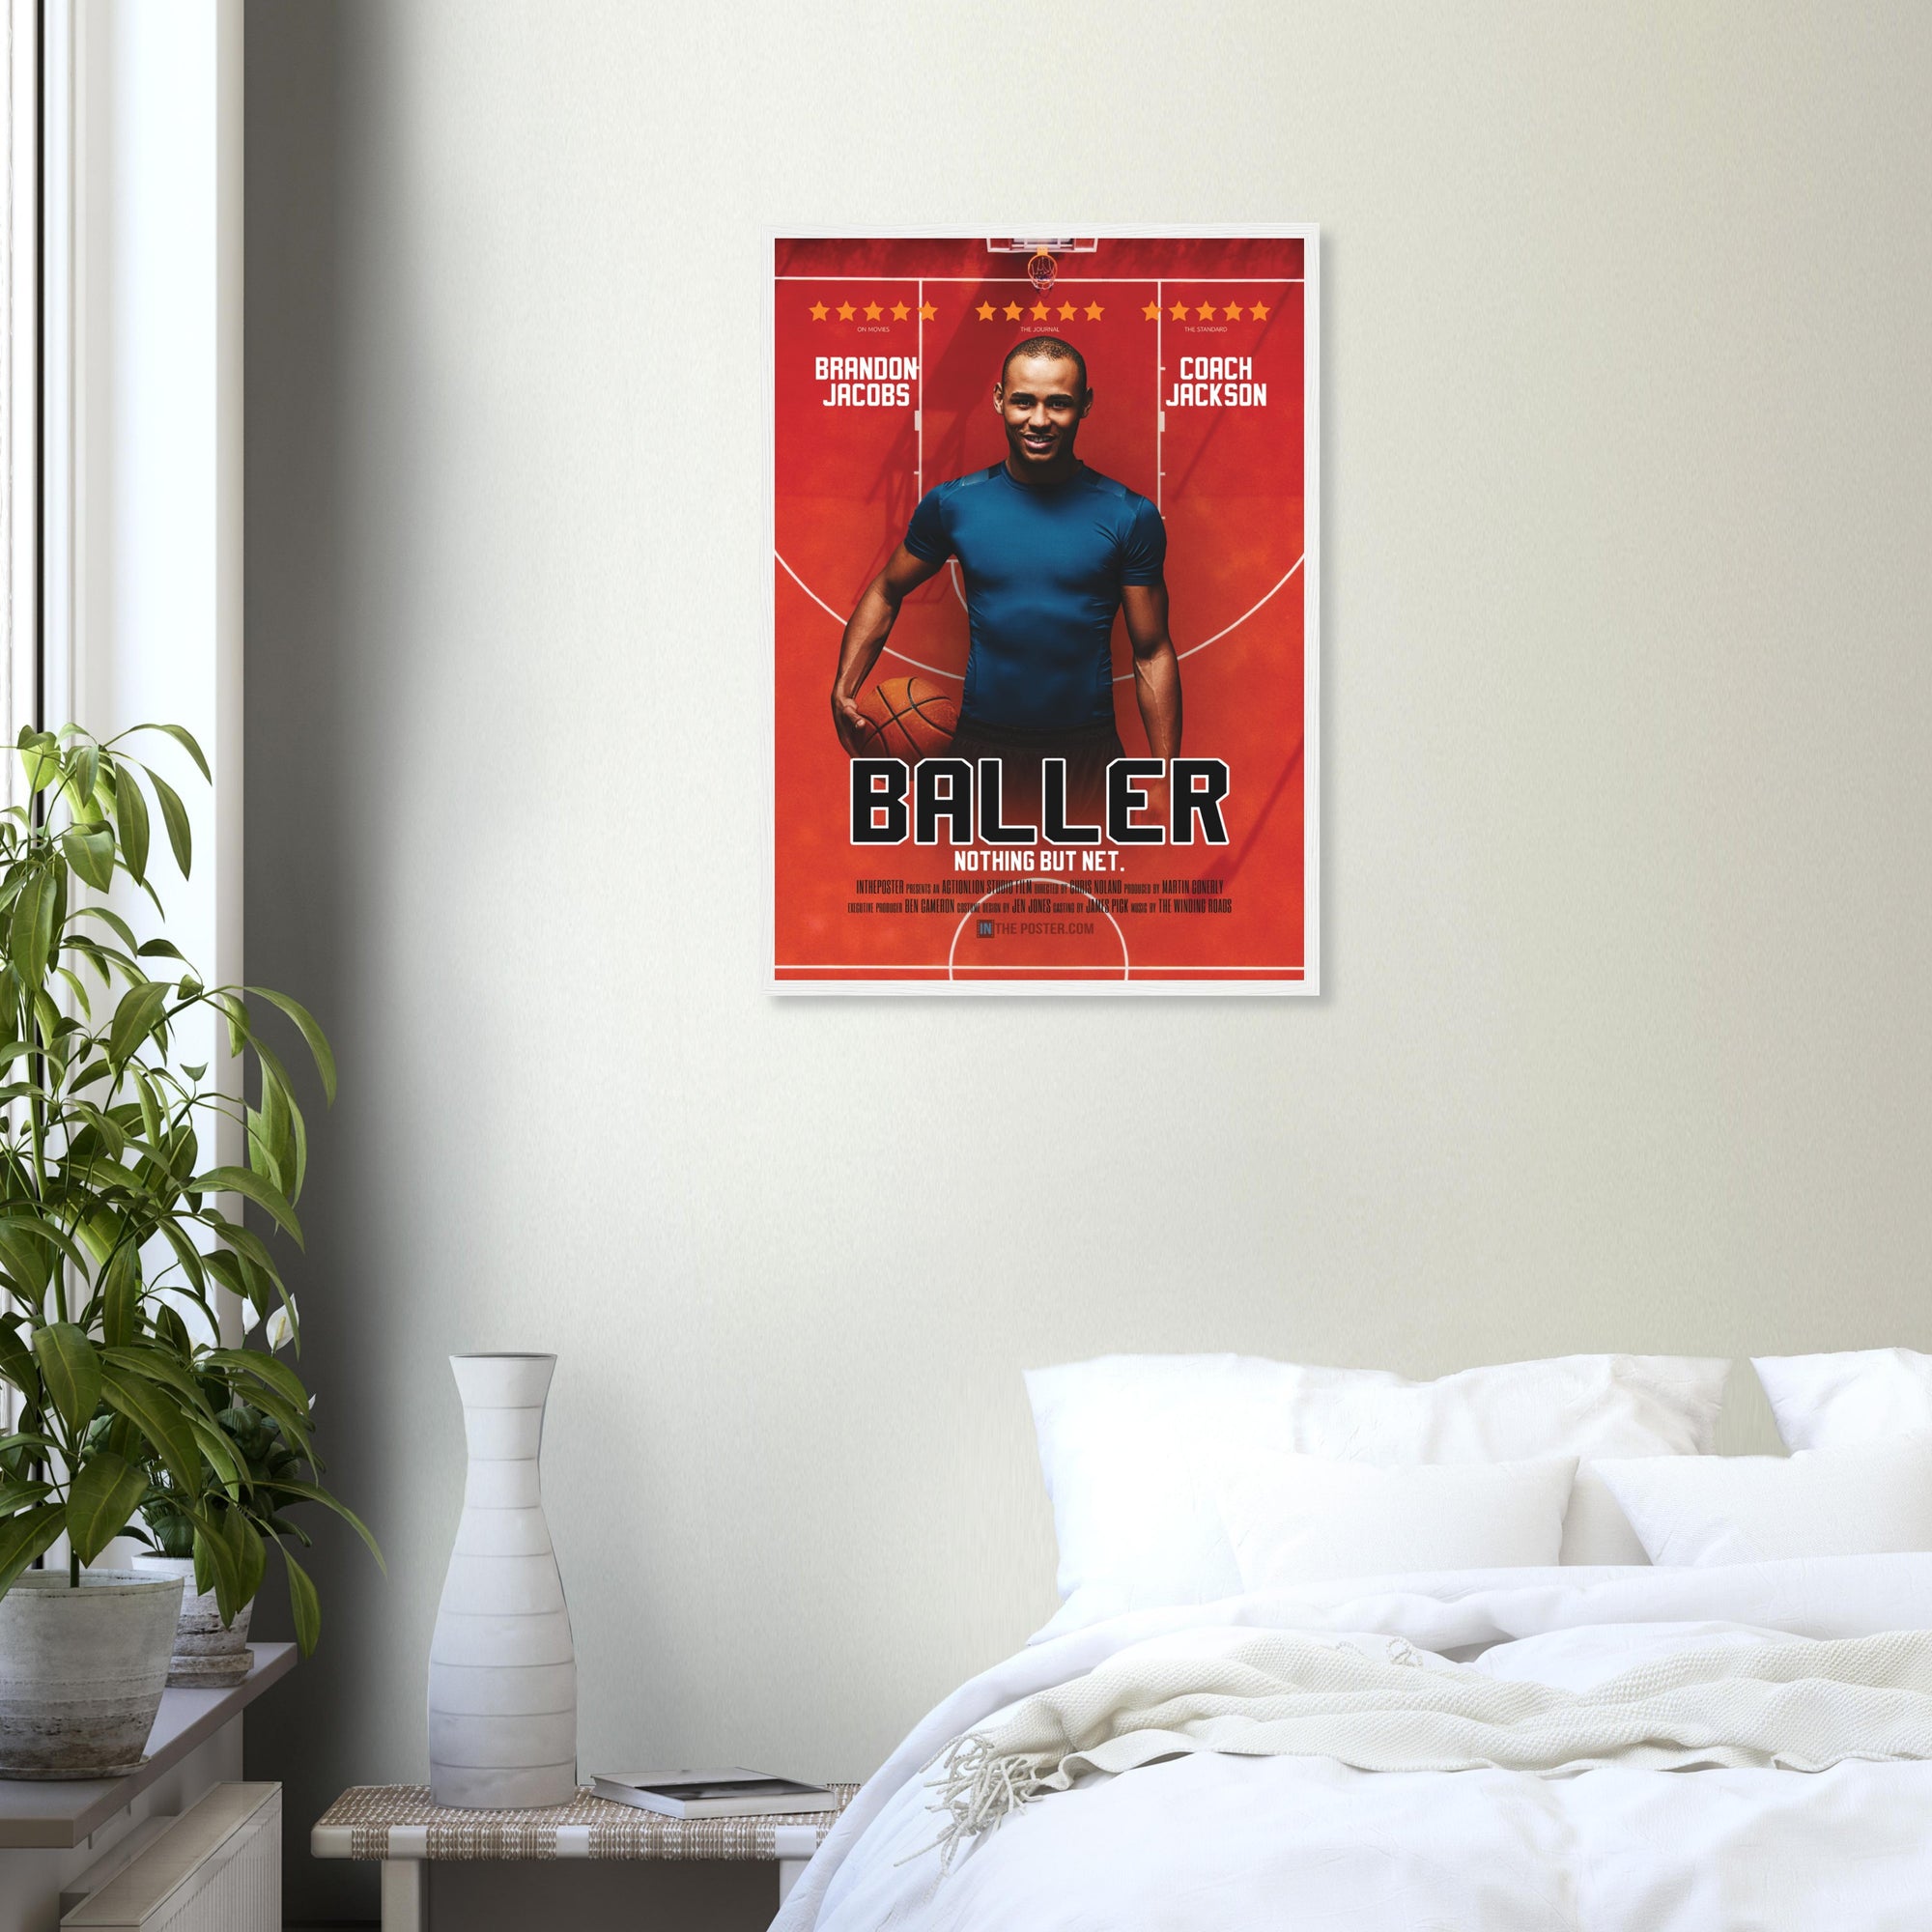 A custom basketball movie poster in a regular white frame on a grey wall above a white bed and plant